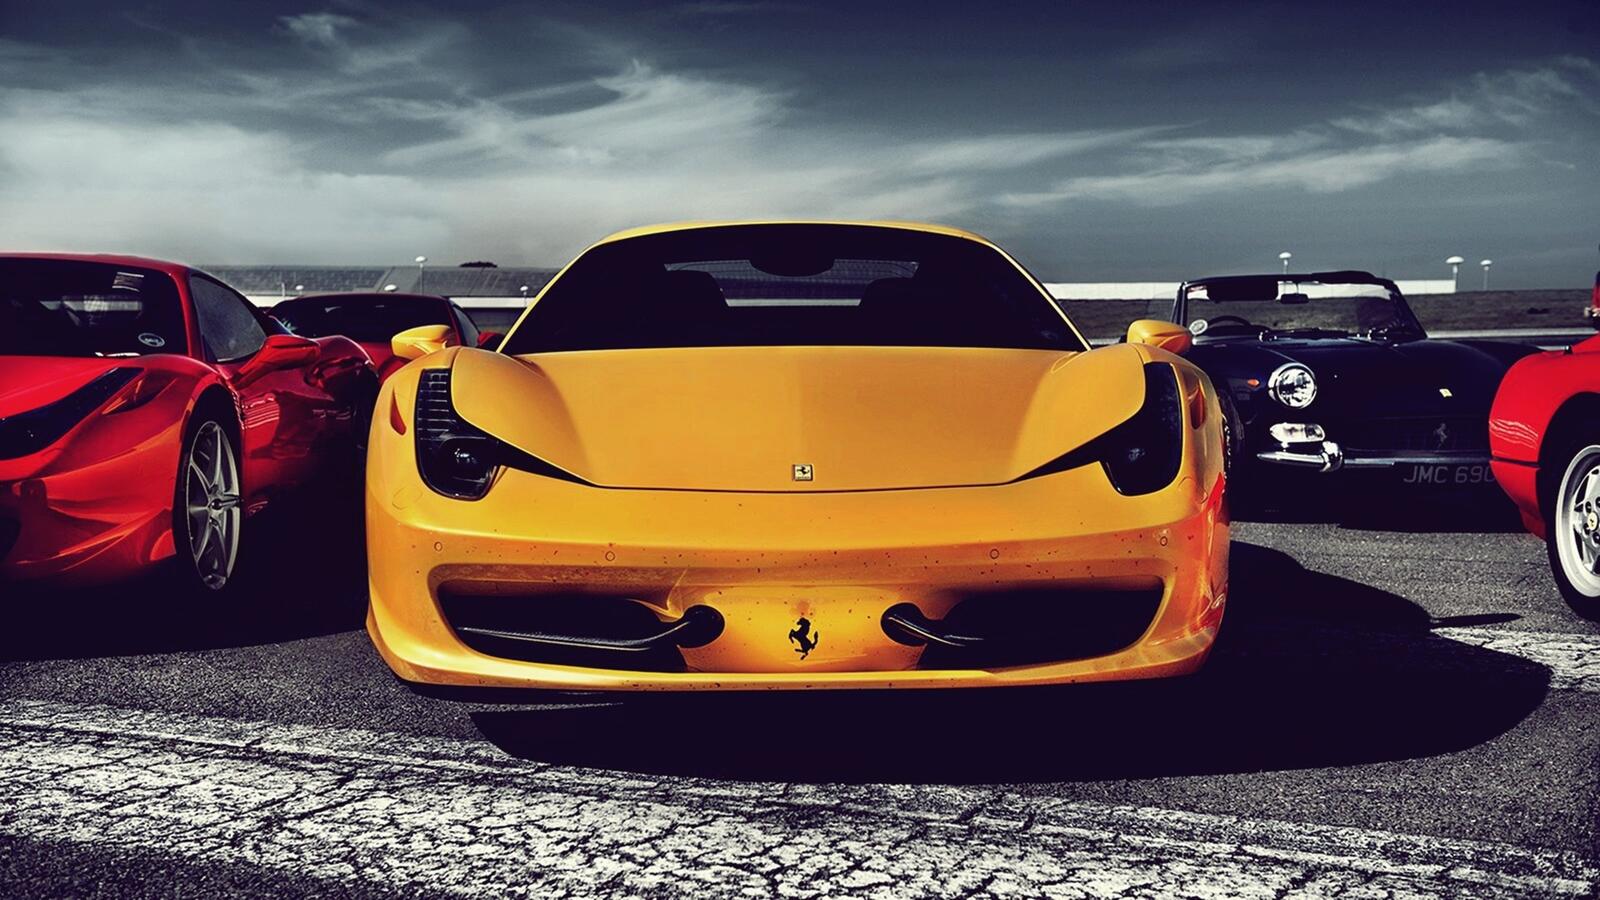 Wallpapers car yellow foreign car on the desktop